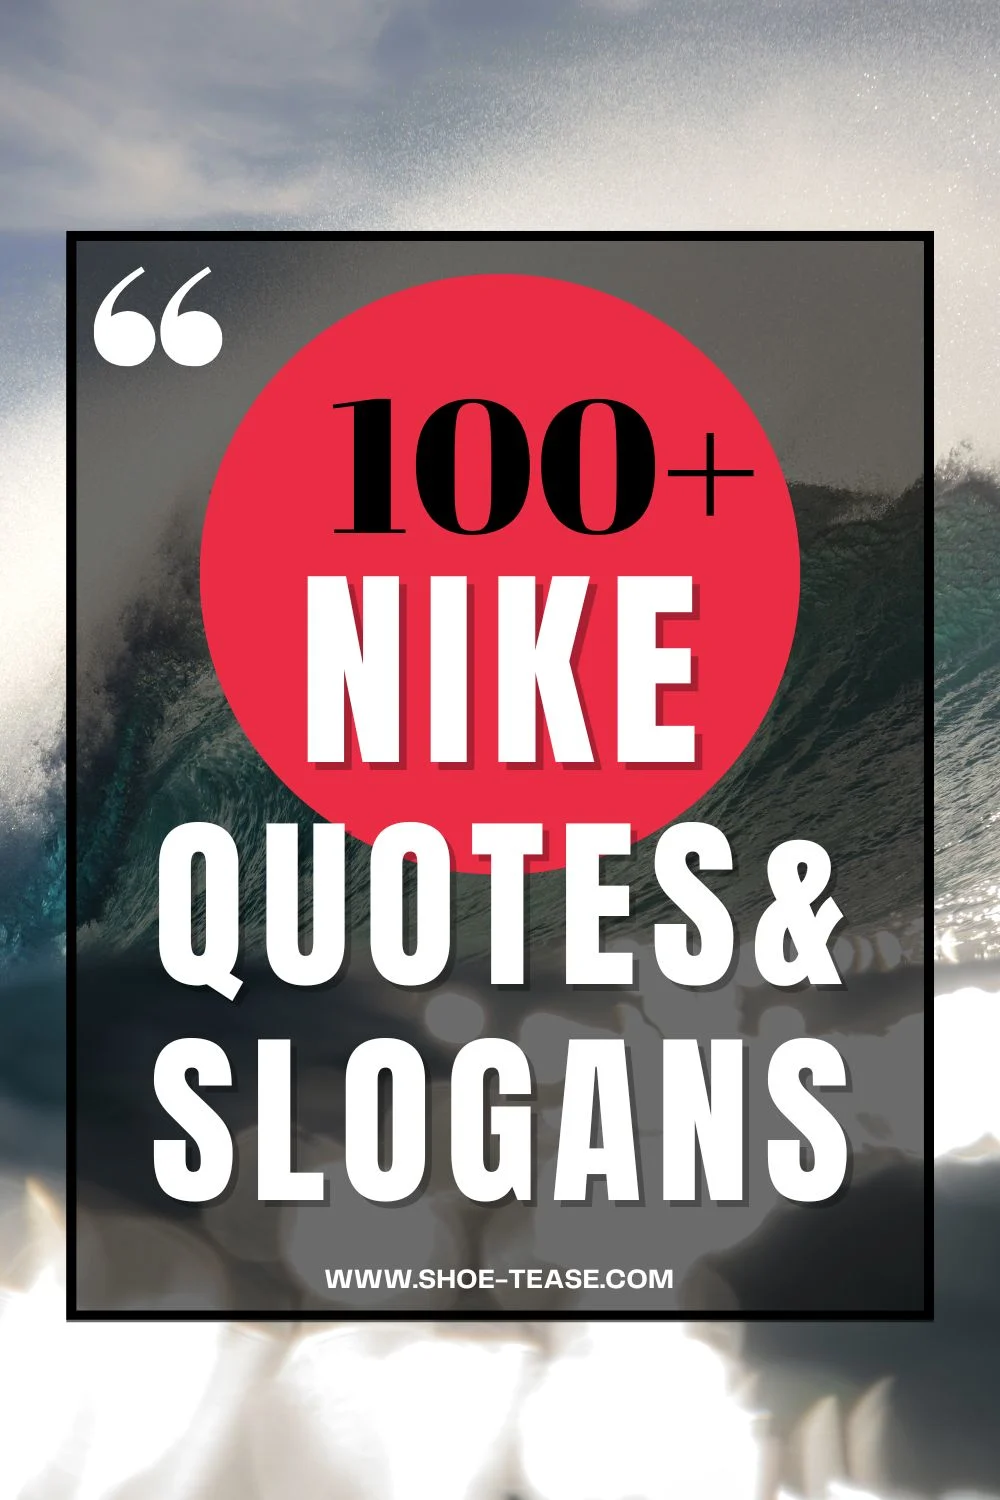 Collage with text reading 100 plus nike quotes and slogans shoetease dot com.